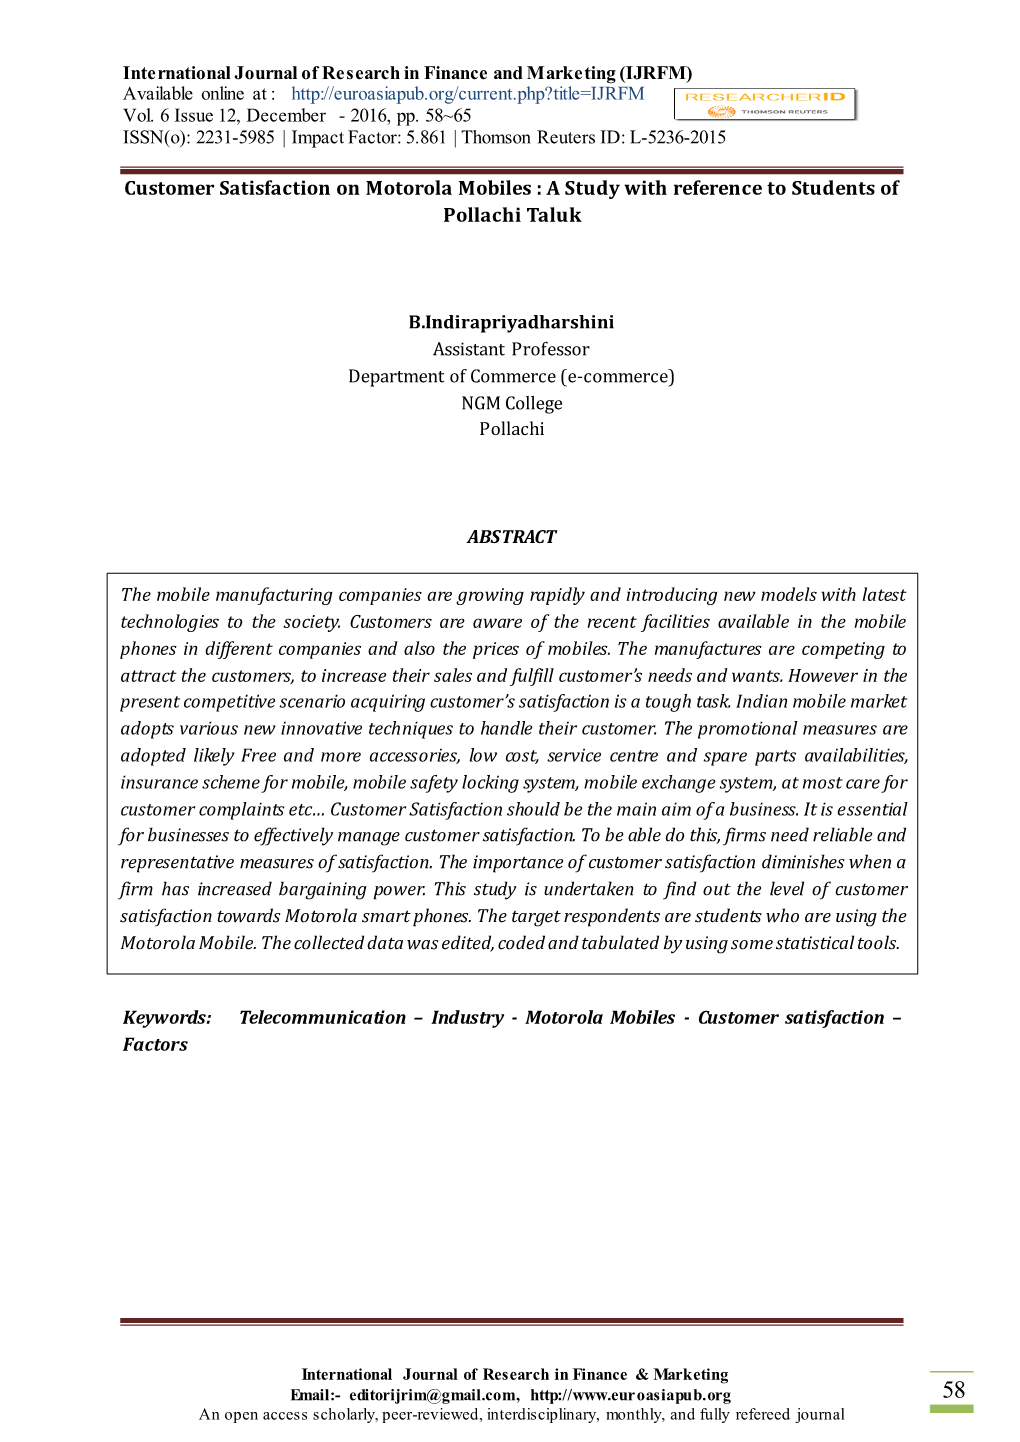 Customer Satisfaction on Motorola Mobiles : a Study with Reference to Students of Pollachi Taluk